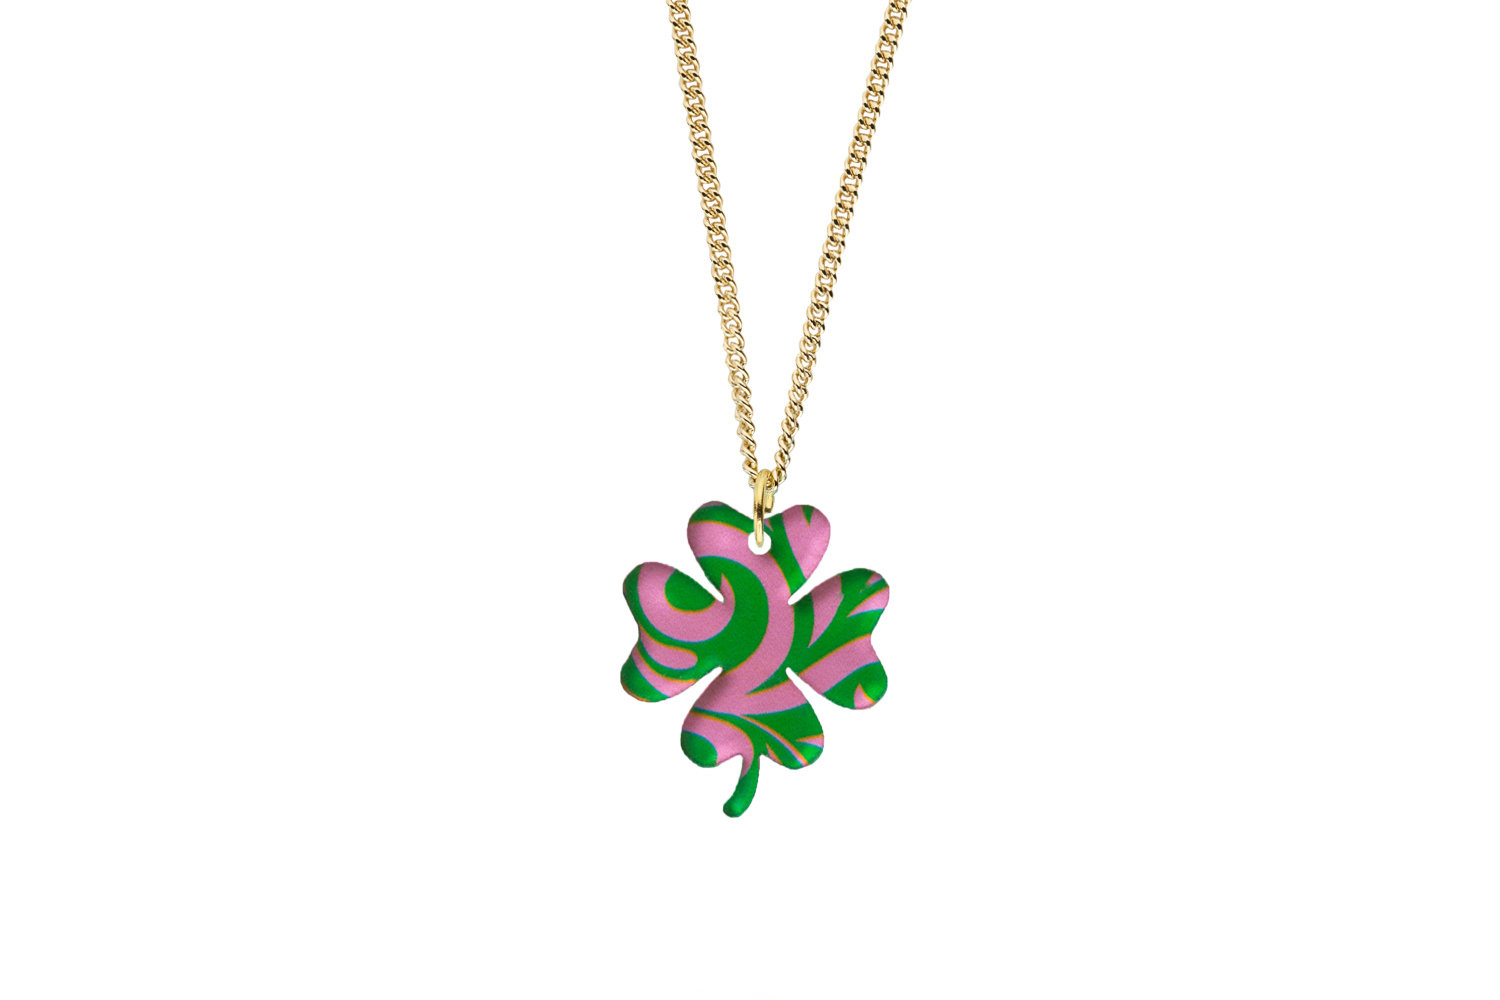 Clover Pendant Sculpted Style on Chain Necklace